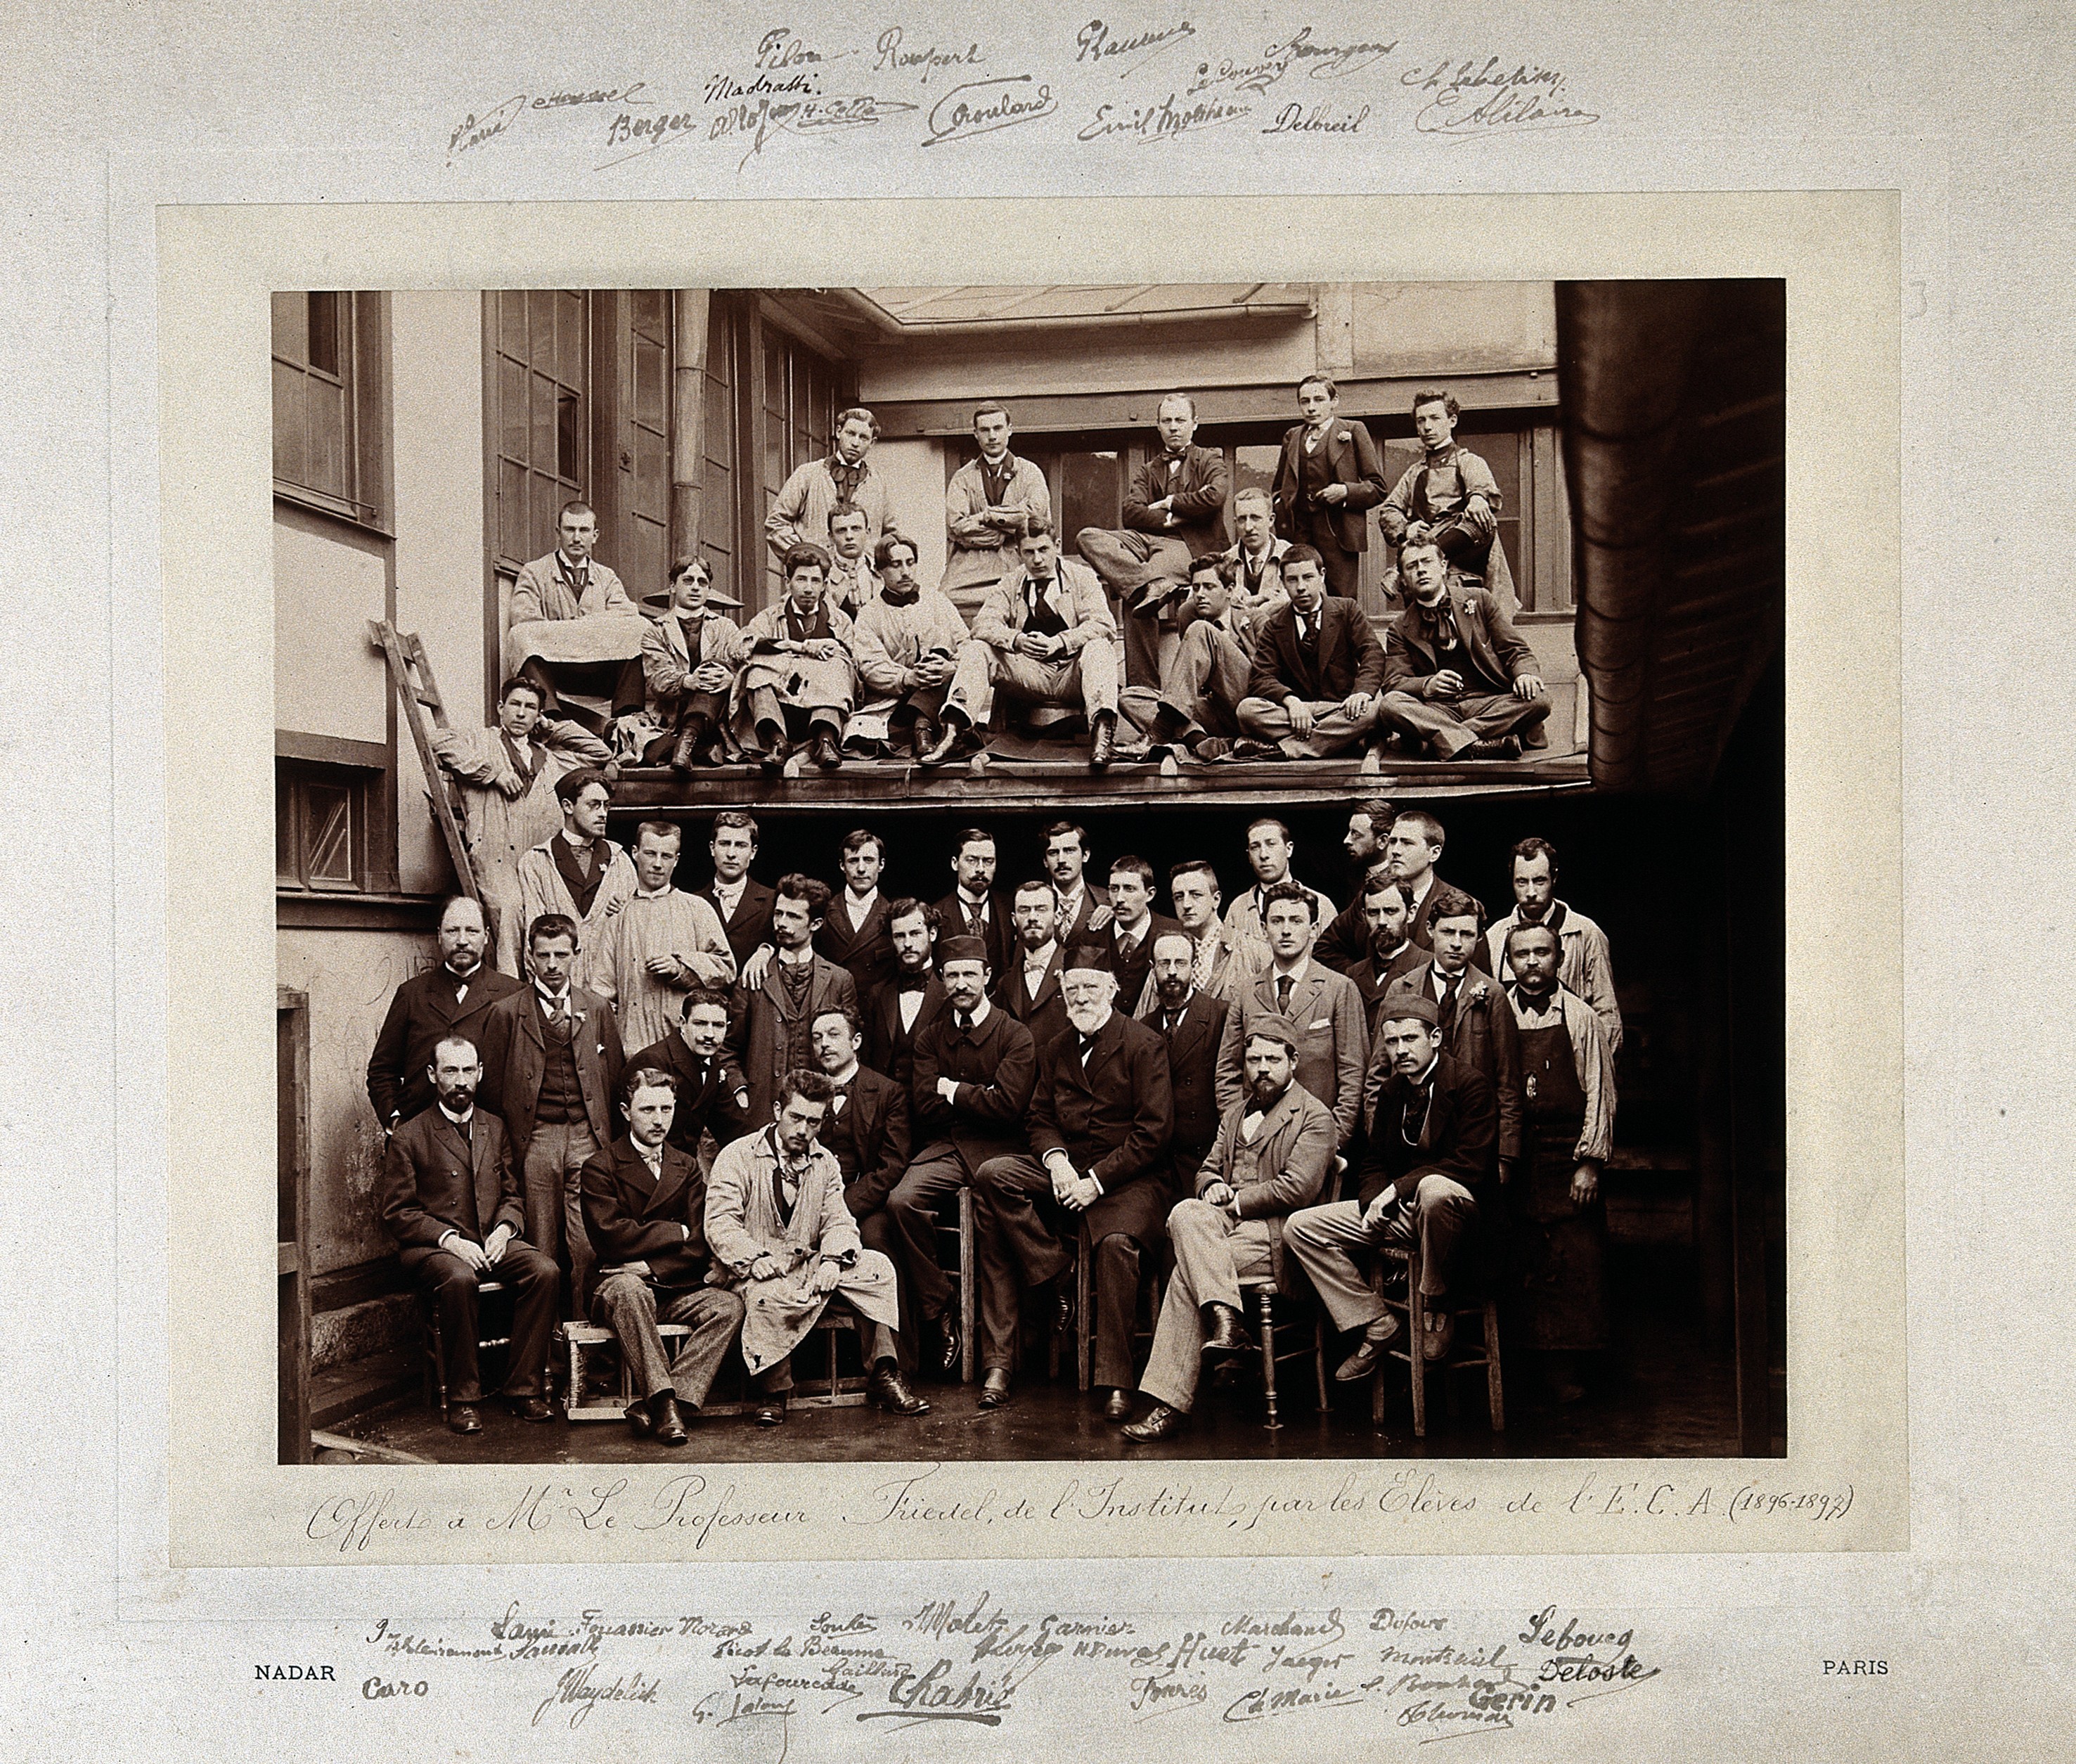 Prof. Friedel and students at the E.C.A. Photograph by Nadar Wellcome V0028218